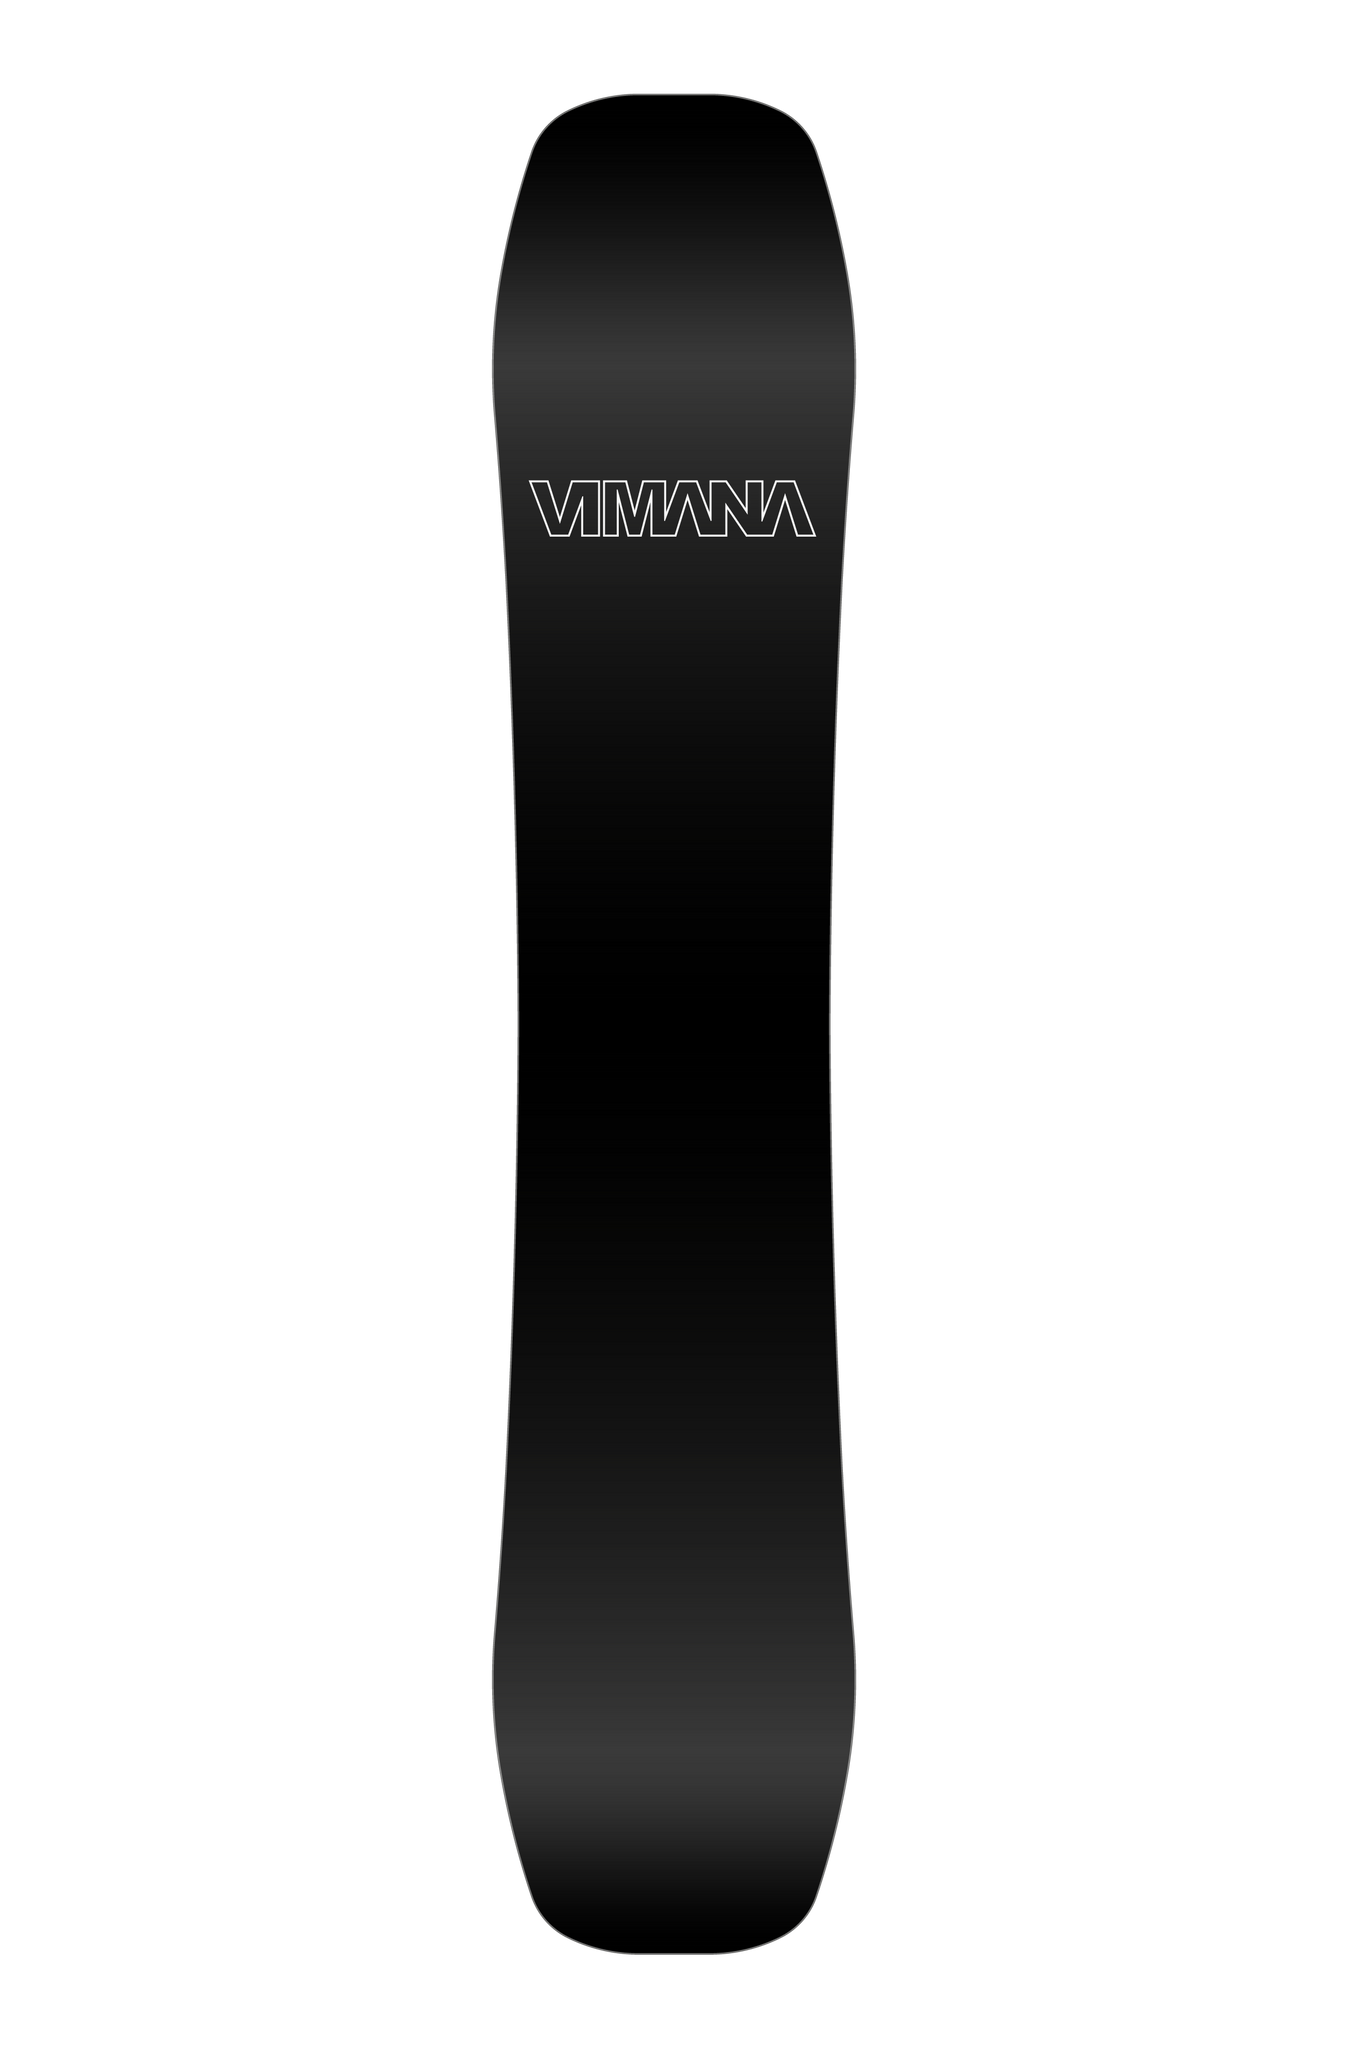 The Continental Twin V3 Snowboard